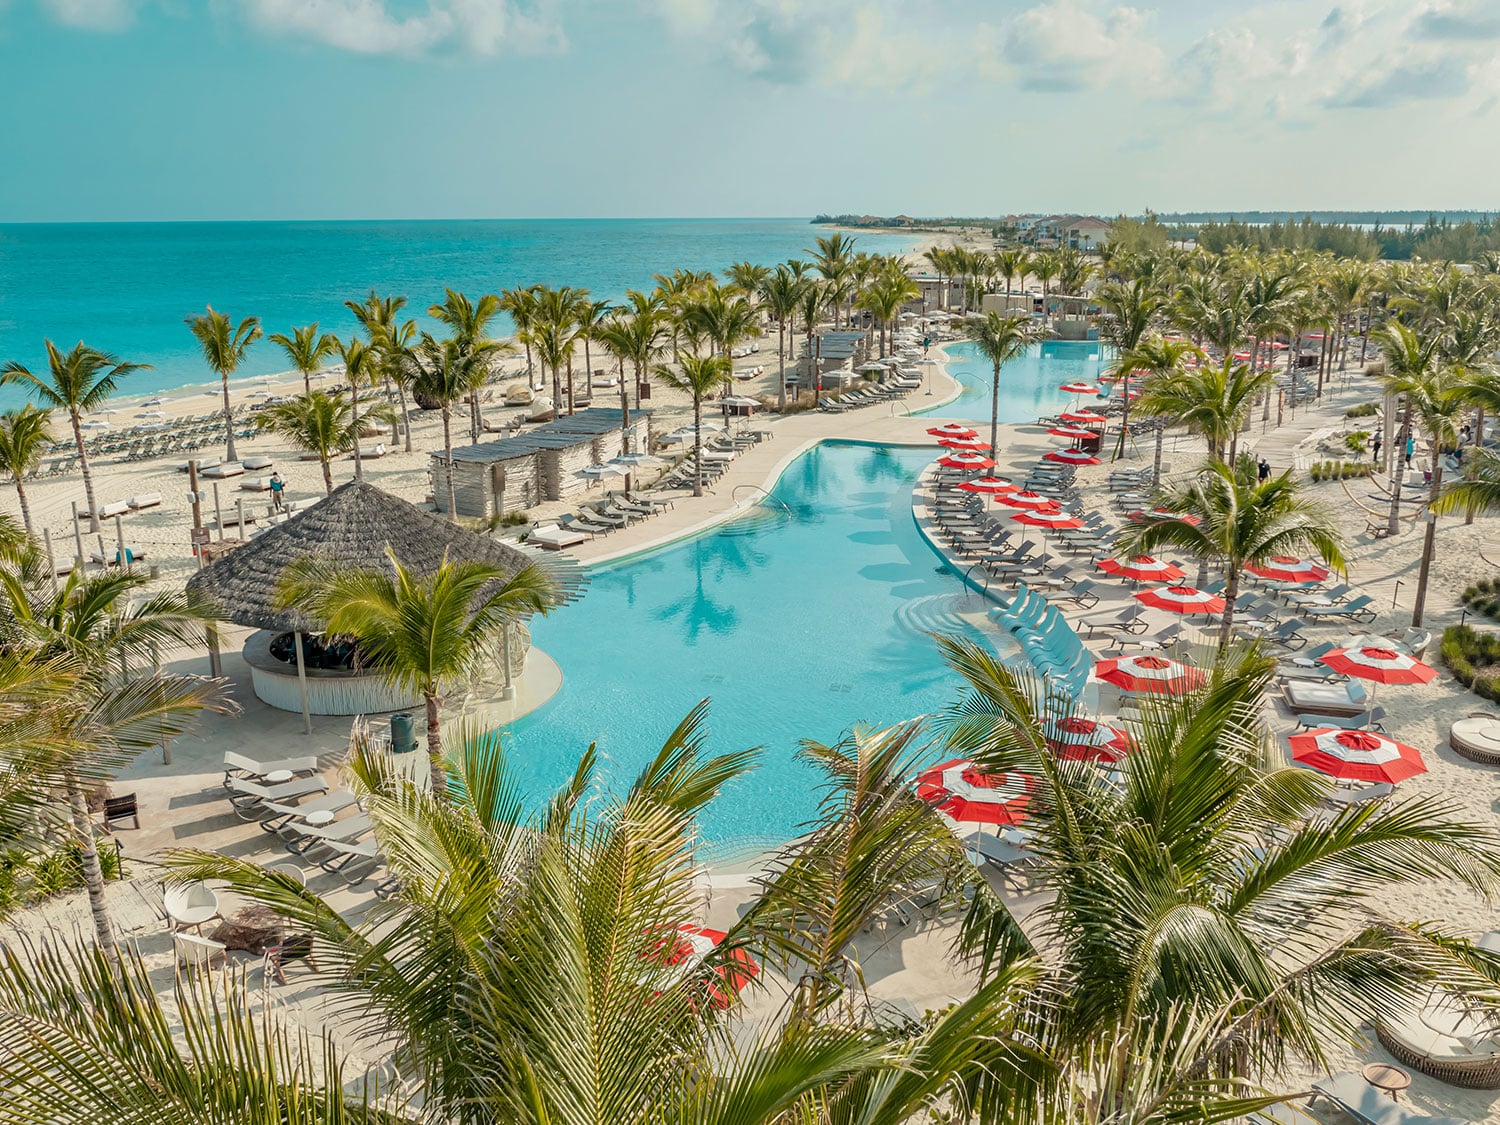 An aerial view of the pool at Resorts World Bimini in the Bahamas.